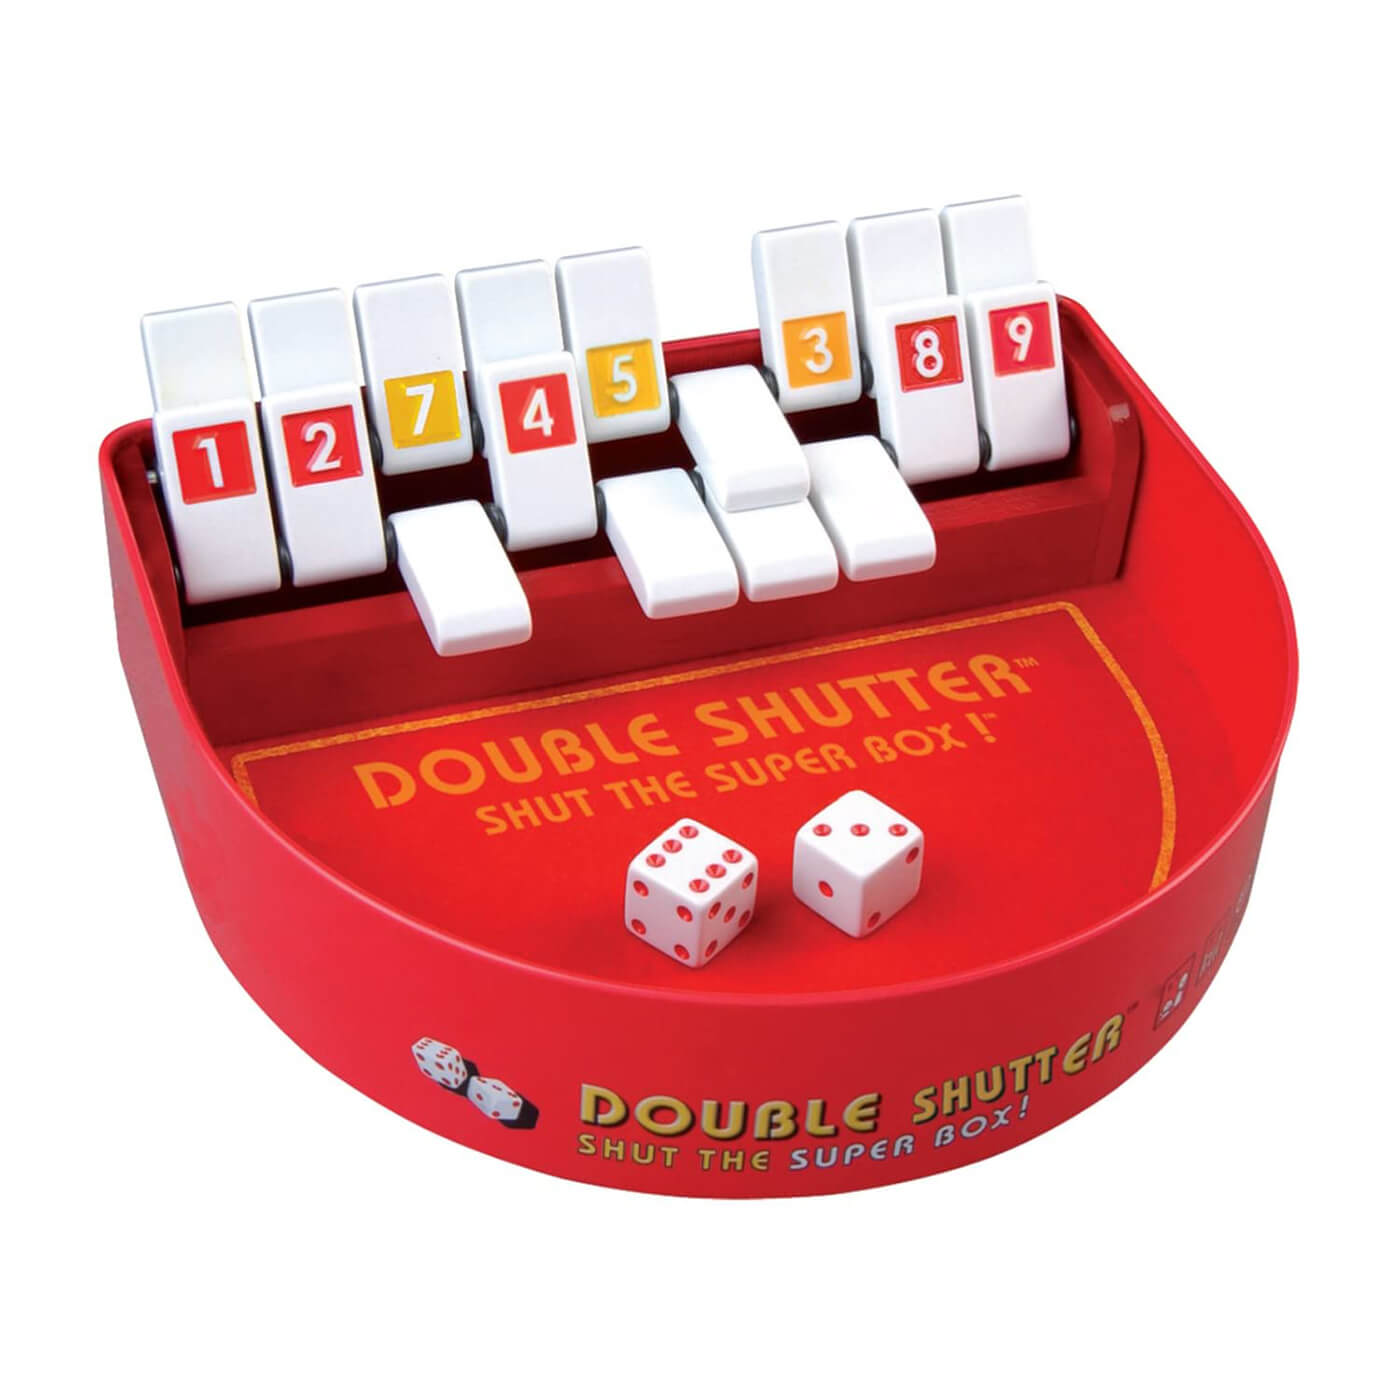 Open box display of Blue Orange Double Shutter Game in Tin.